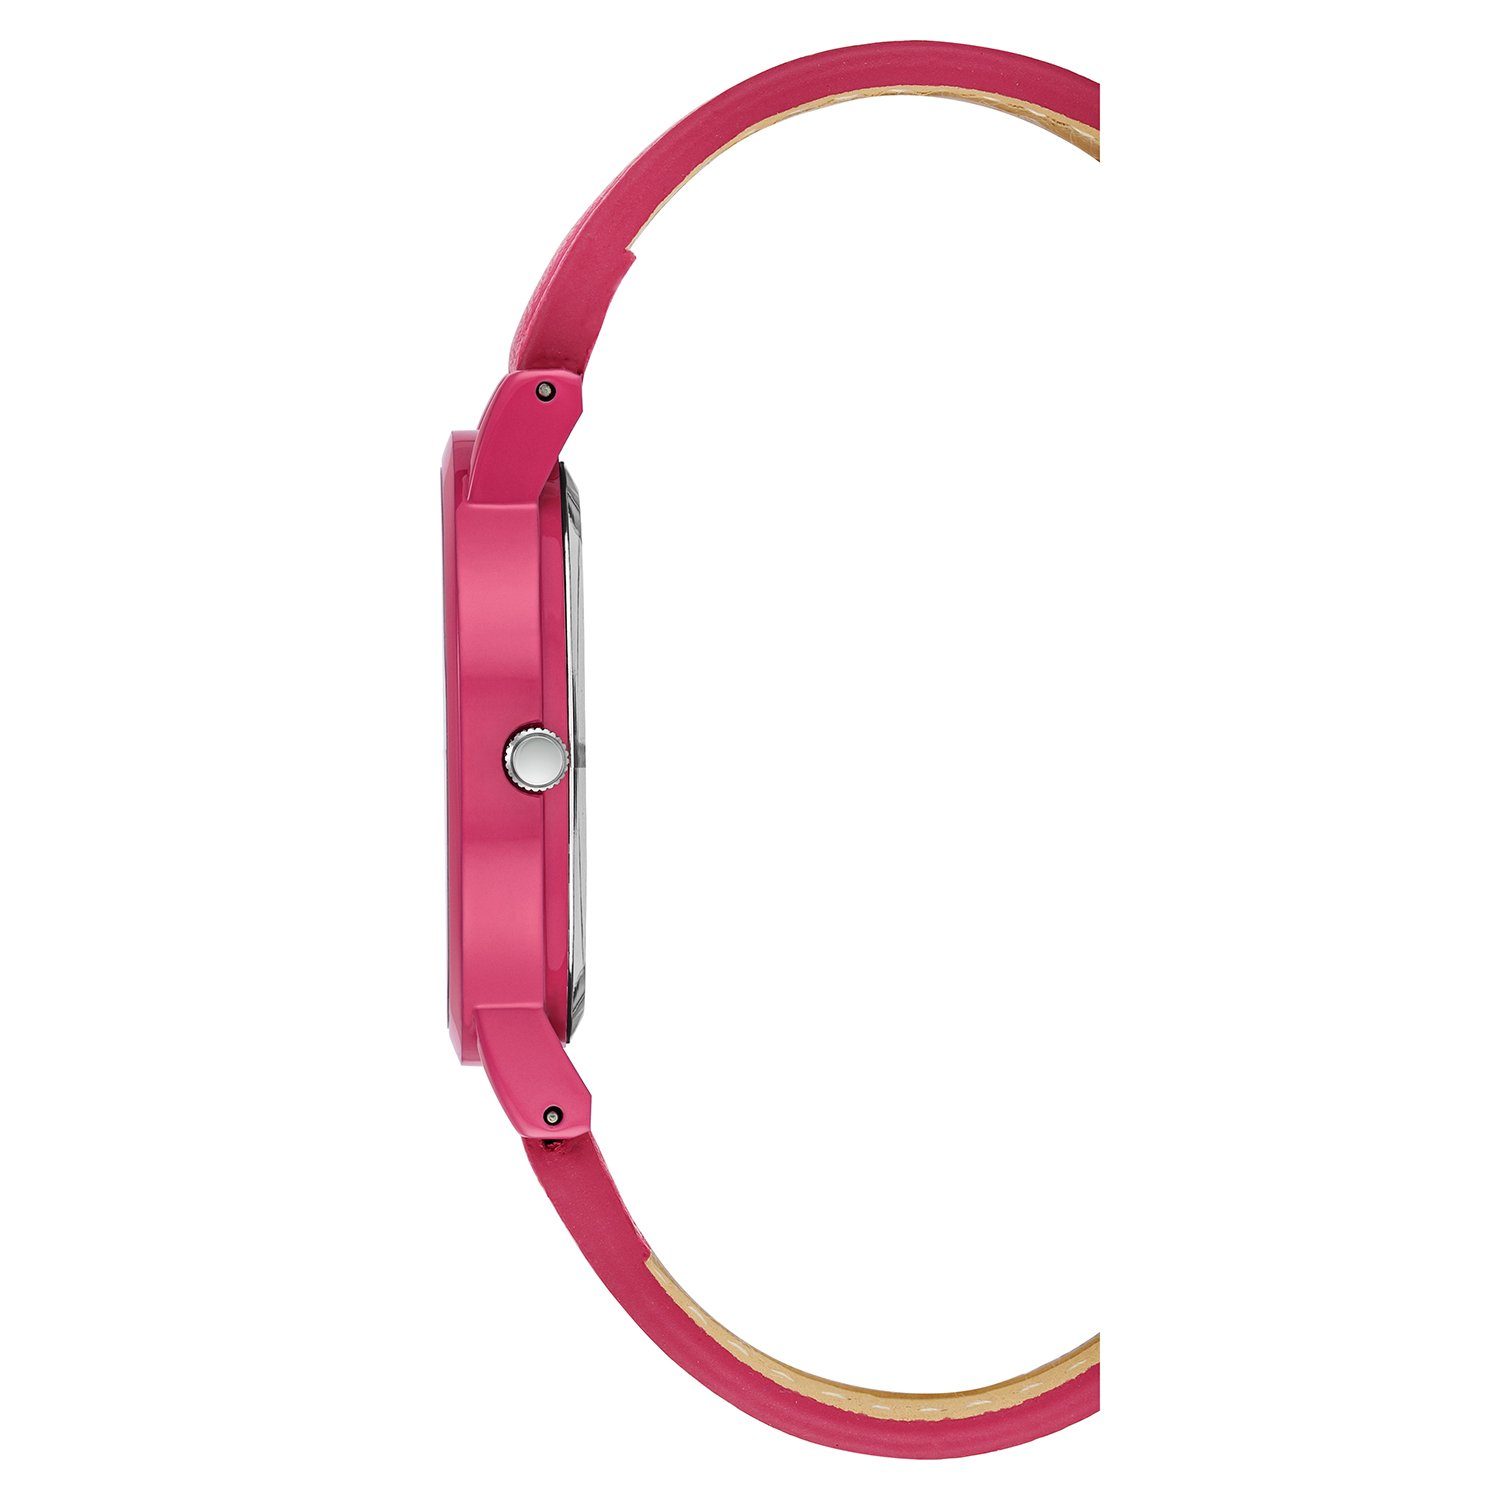 JC/1255HPHP Juicy Couture Digitaluhr